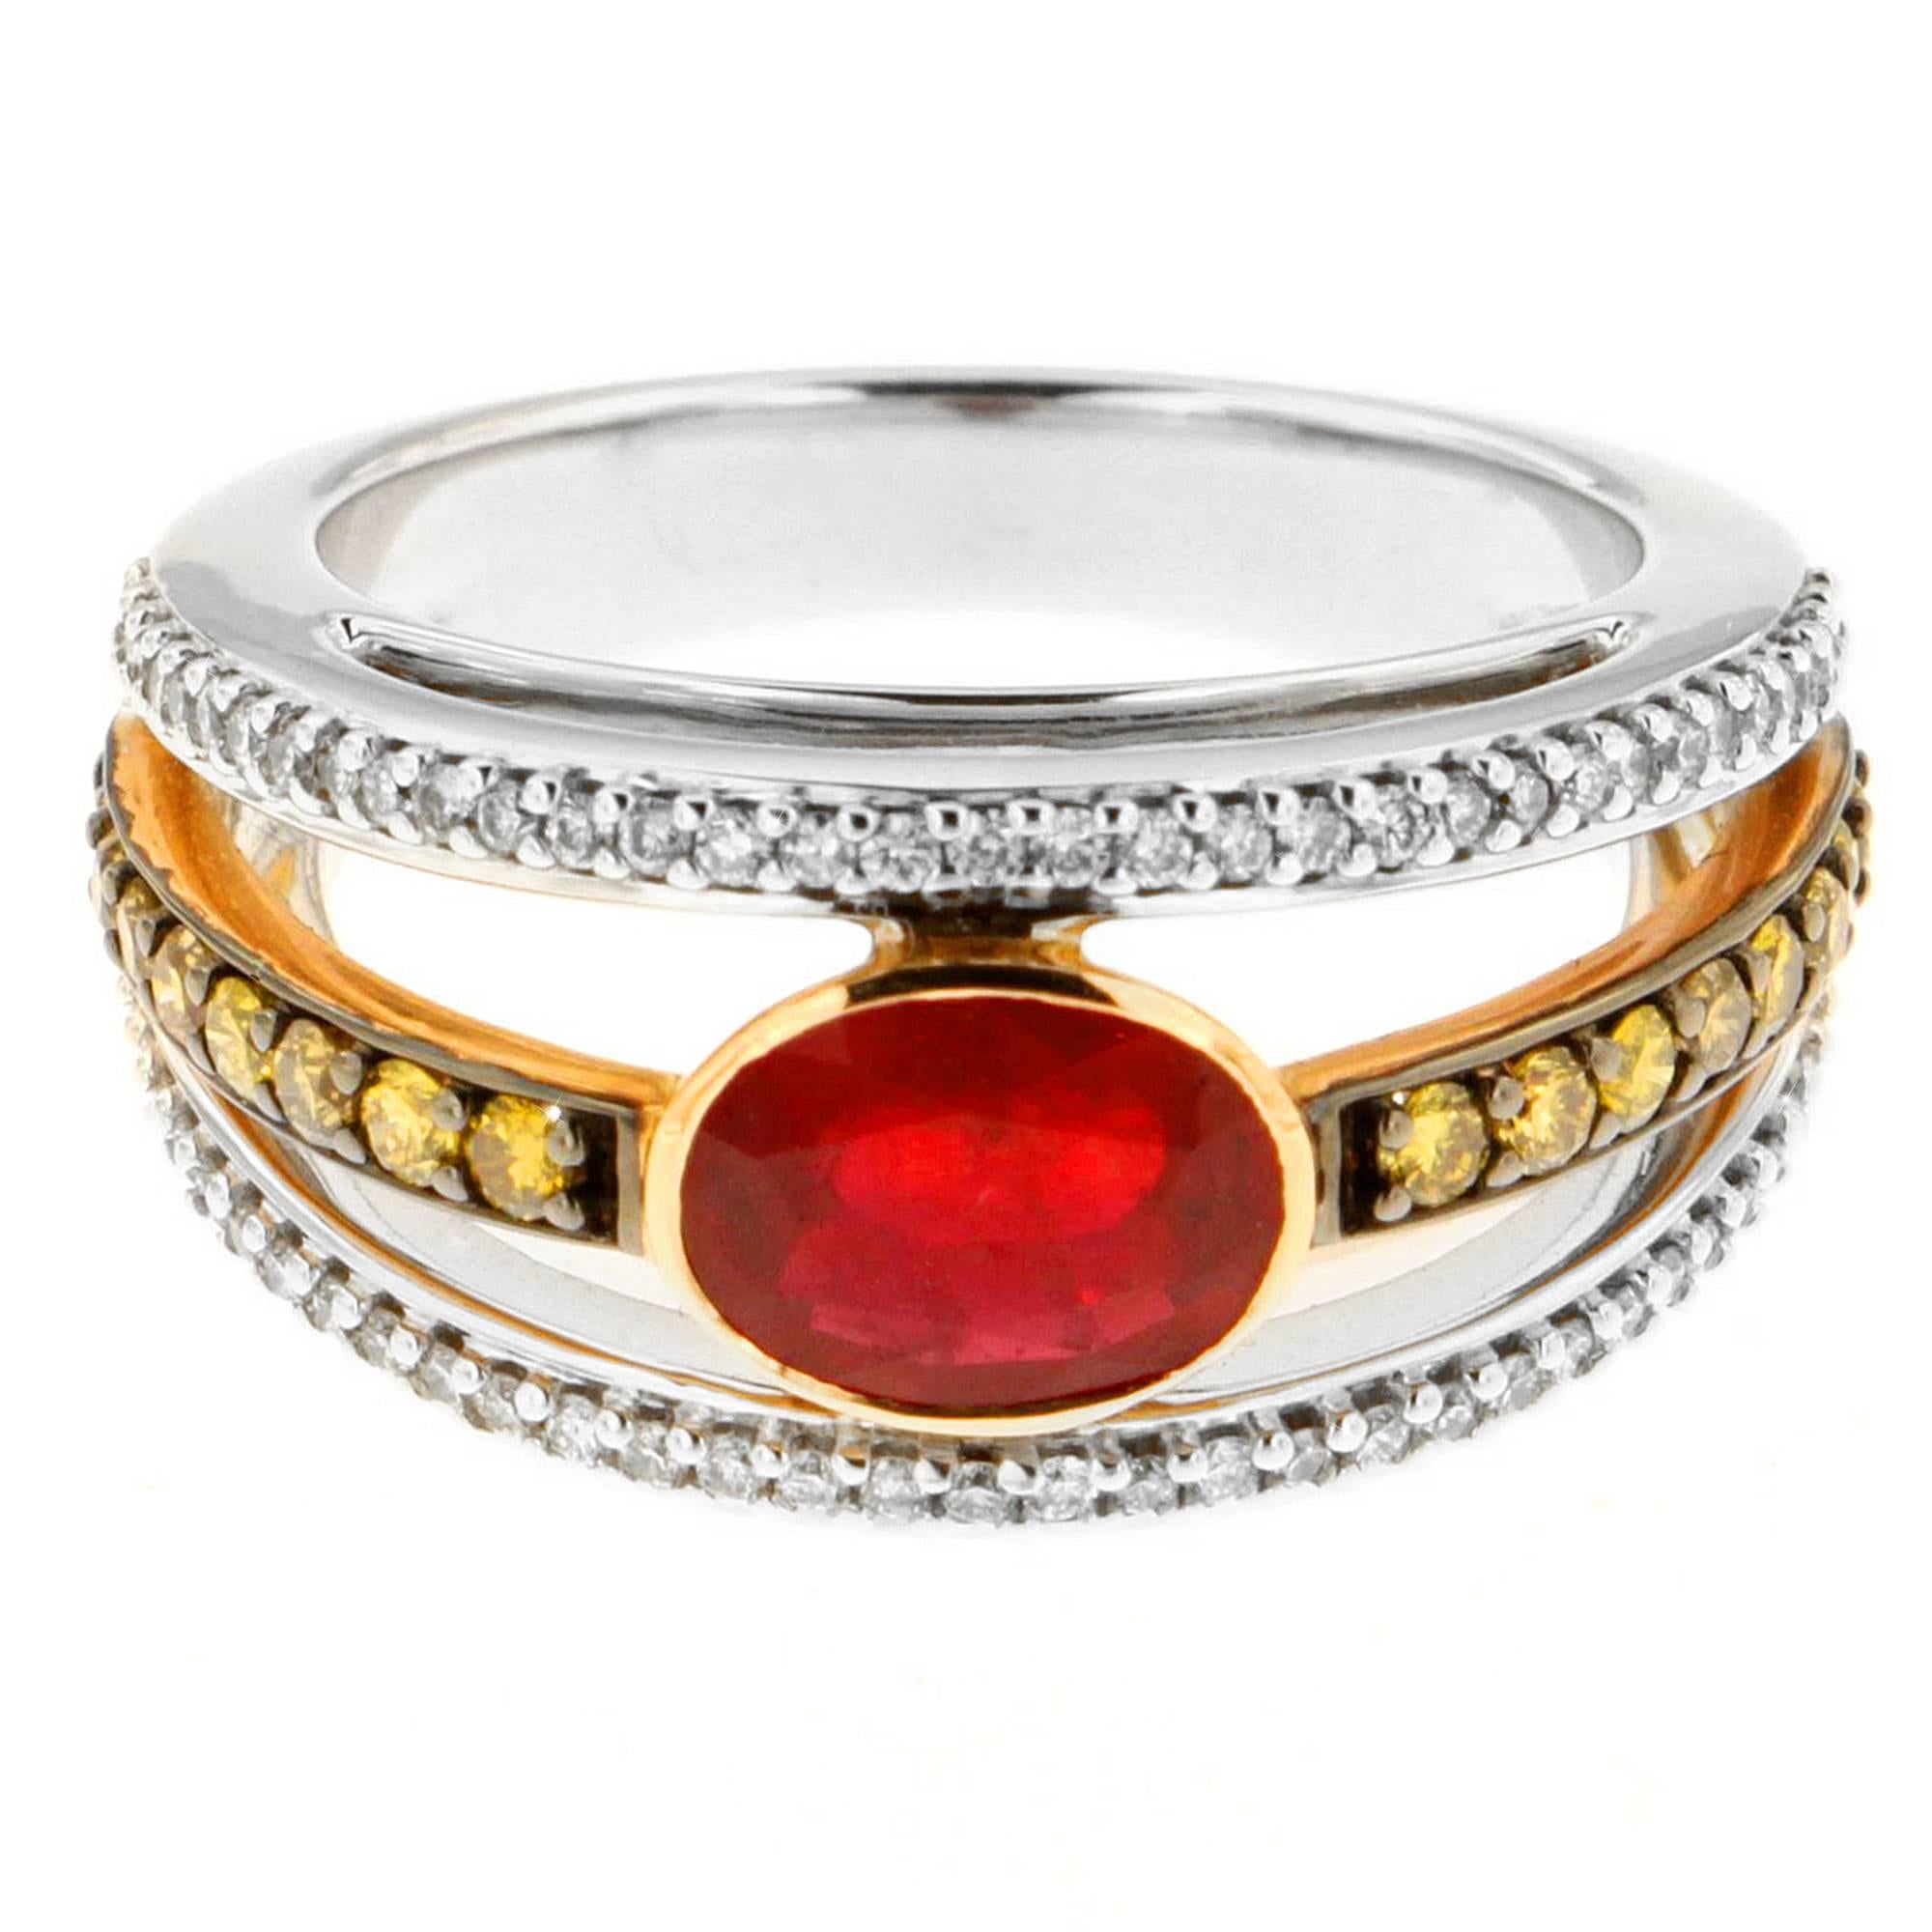 Say hello to the New Classic! Zorab's halo style ring features a 1.78 Carat Ruby Center Stone with 0.38 Carats of White Diamonds and 0.40 Carats of yellow Diamonds emphasizing the fiery glow of the Ruby. 

This item has a serial number and bears the